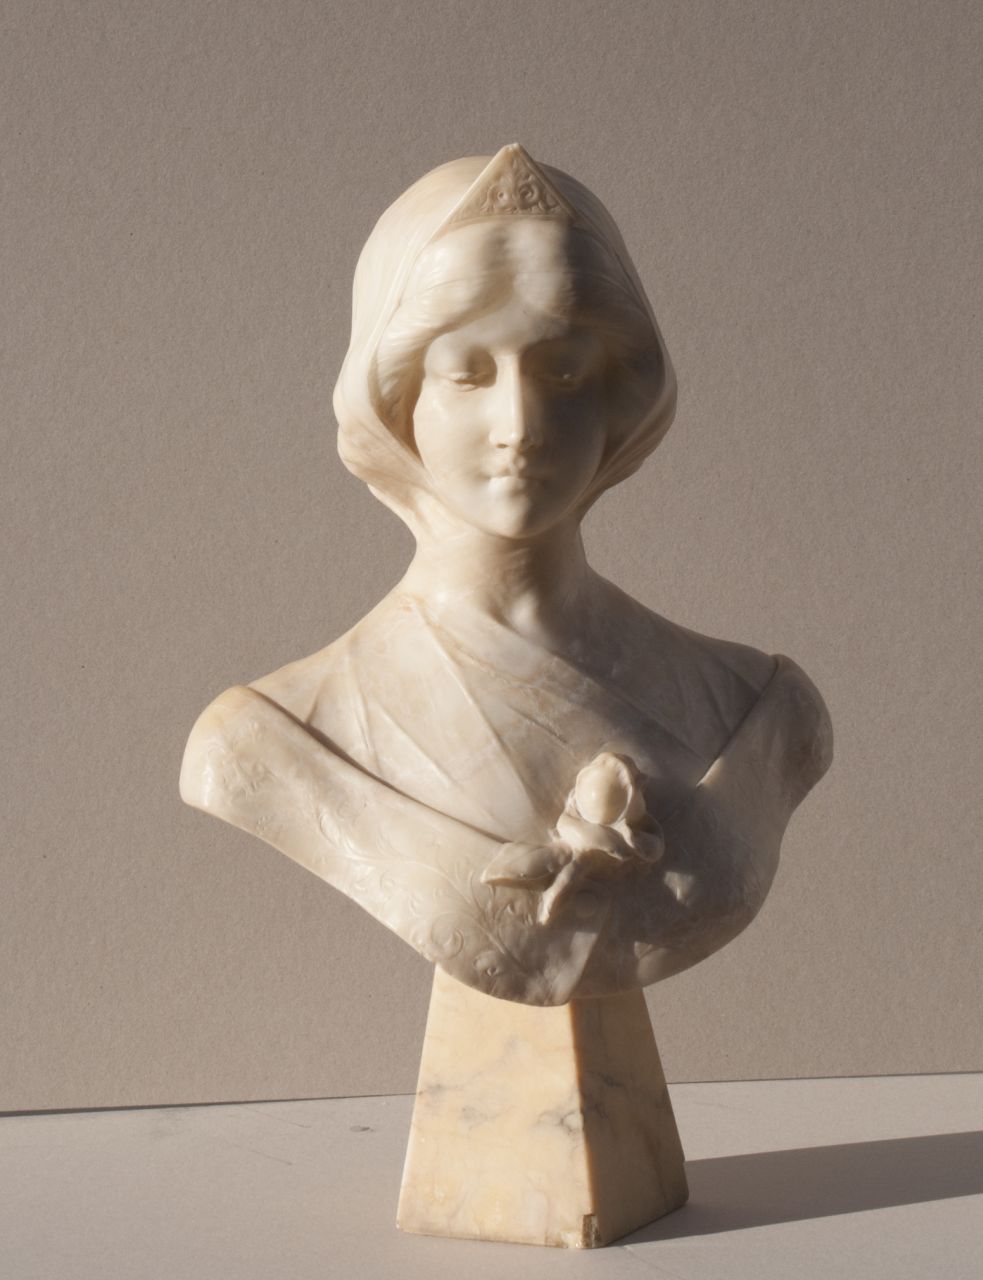 Biagini U.  | U. Biagini, Bust of a young woman, alabaster 60.0 x 40.0 cm, signed on the back